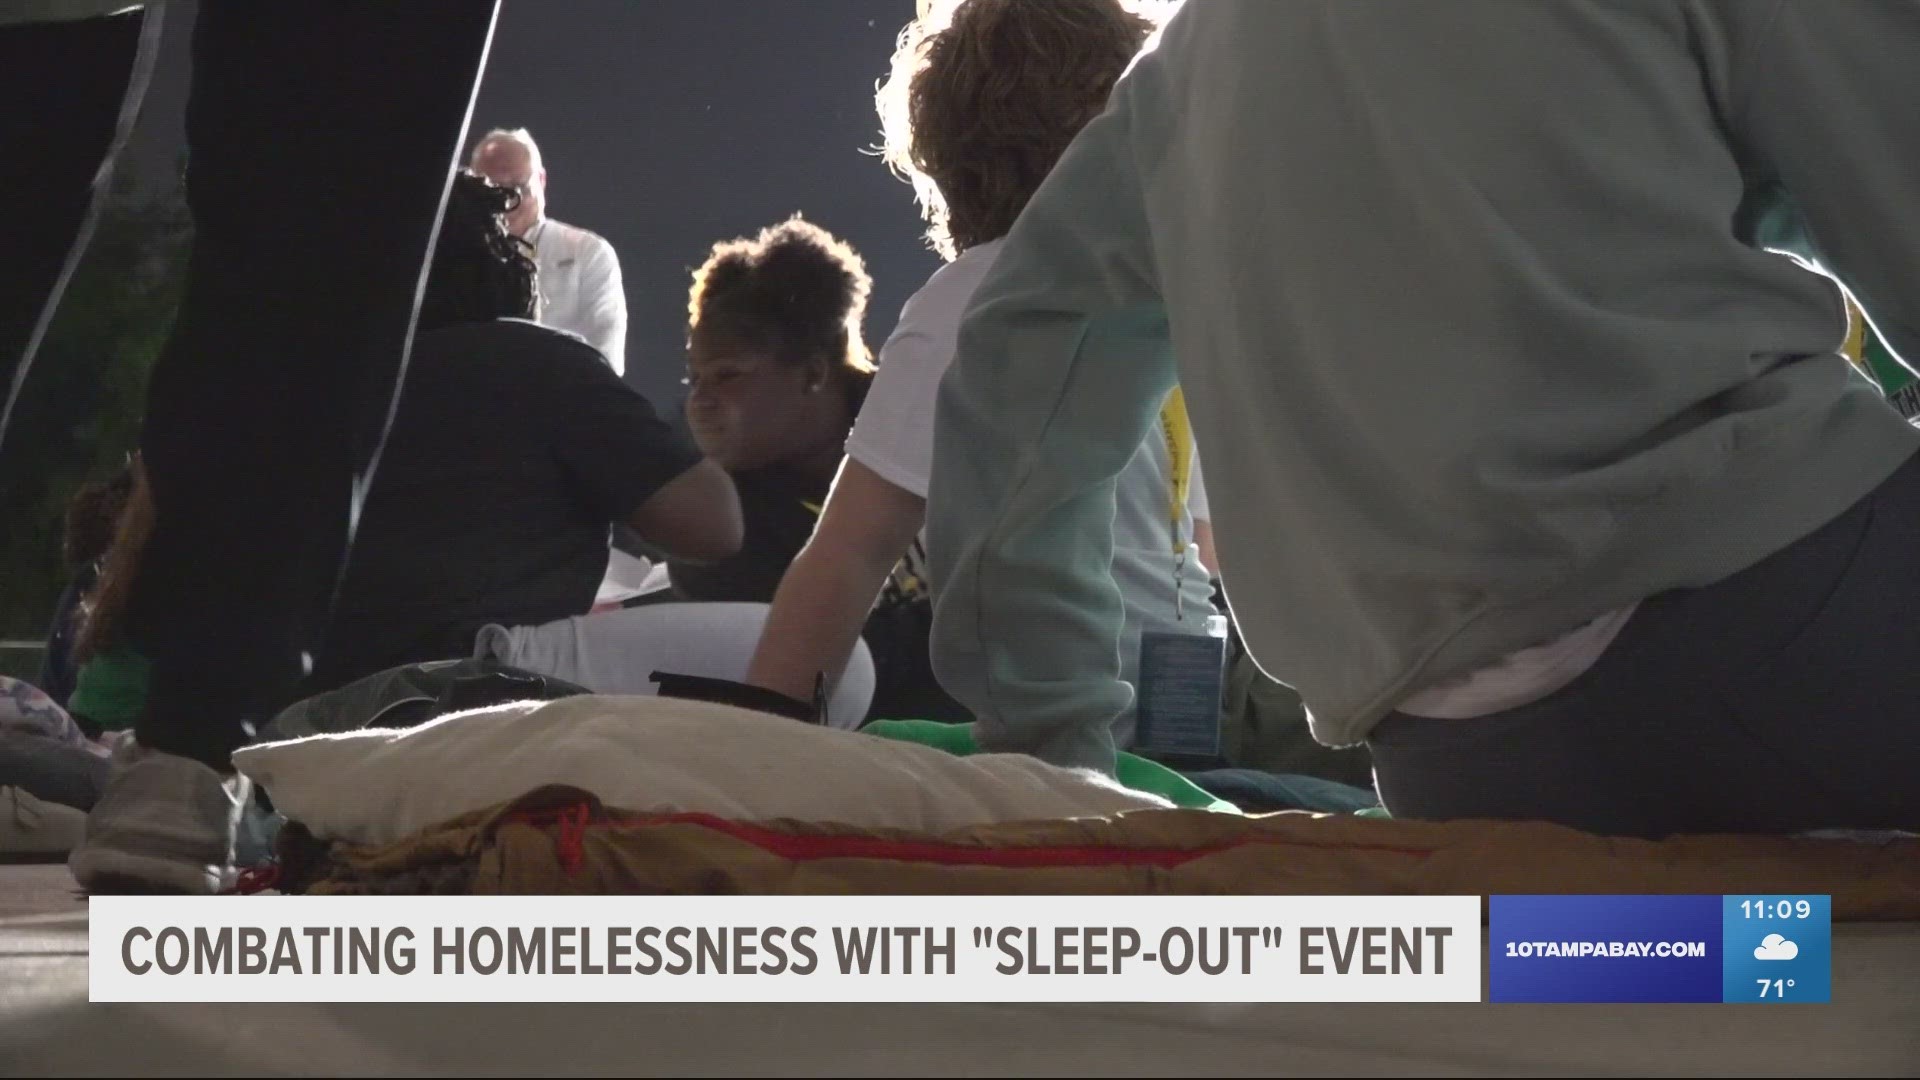 The 'sleep-out' event was aimed at educating the public on the resources available for those facing homelessness.